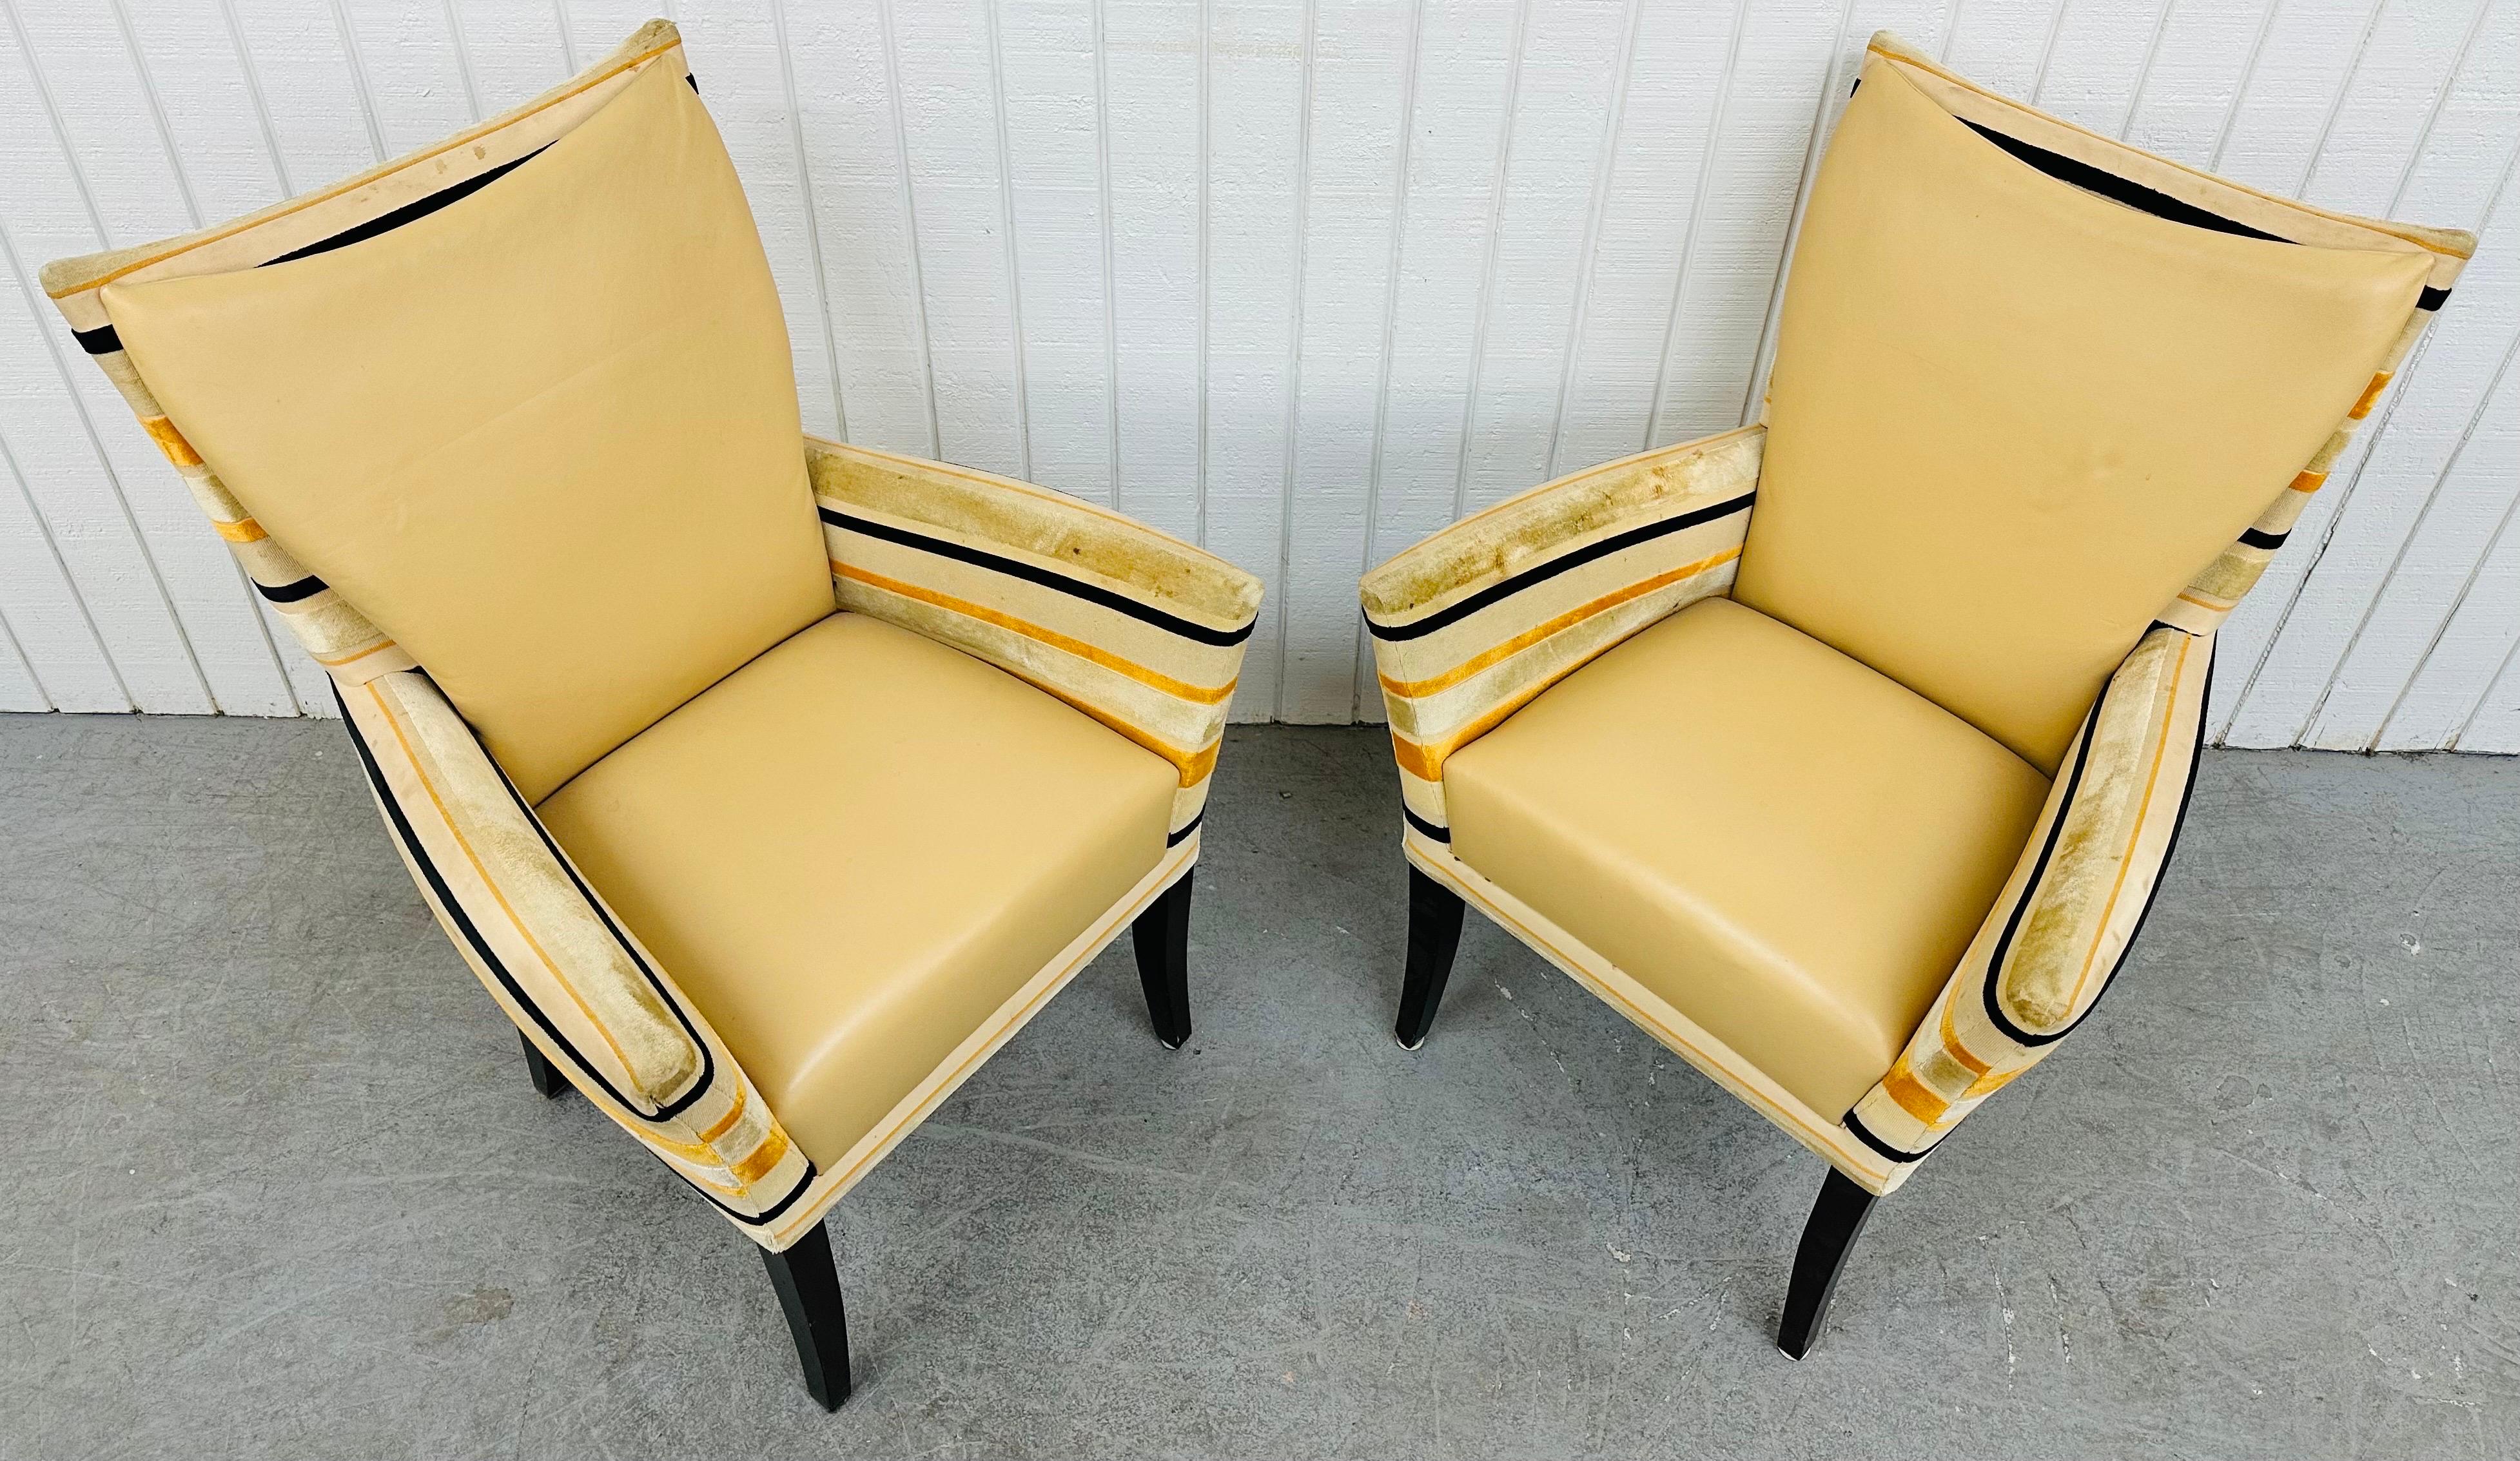 American Vintage Deco Style Lounge Chairs - Set of 2 For Sale